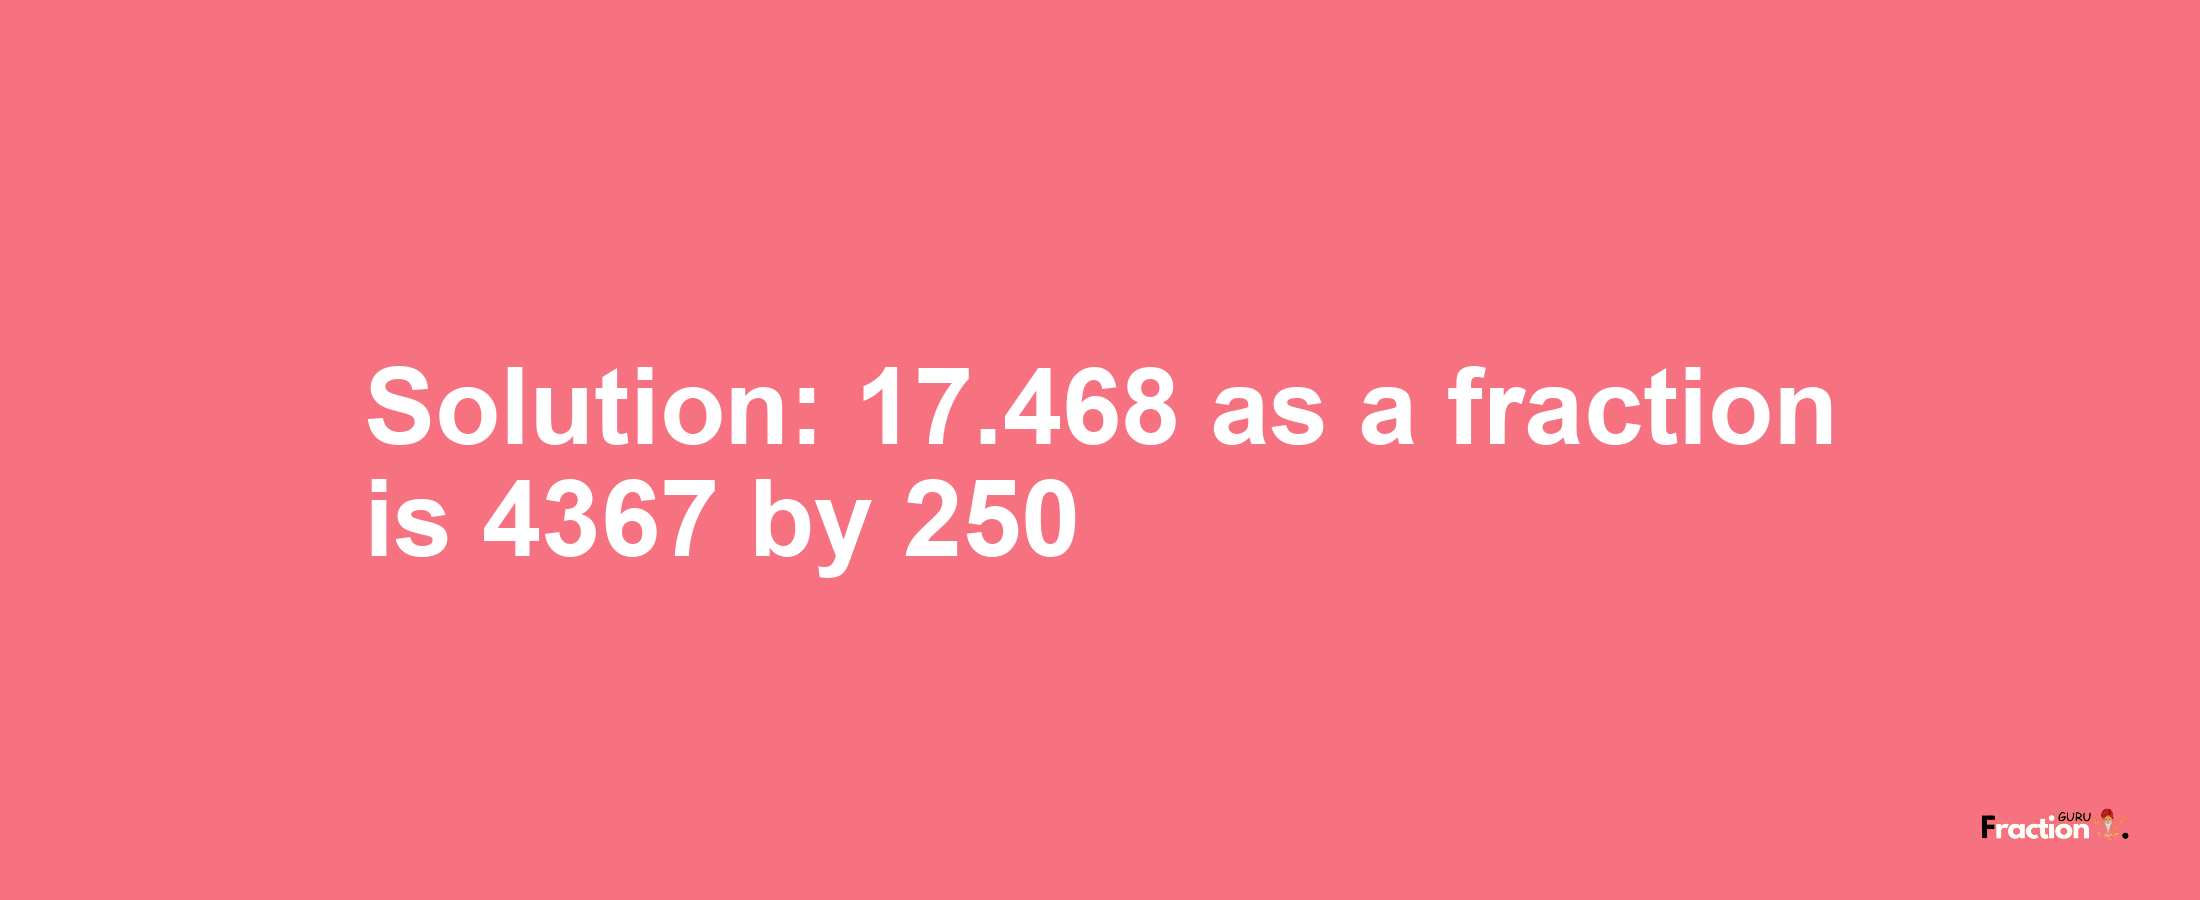 Solution:17.468 as a fraction is 4367/250